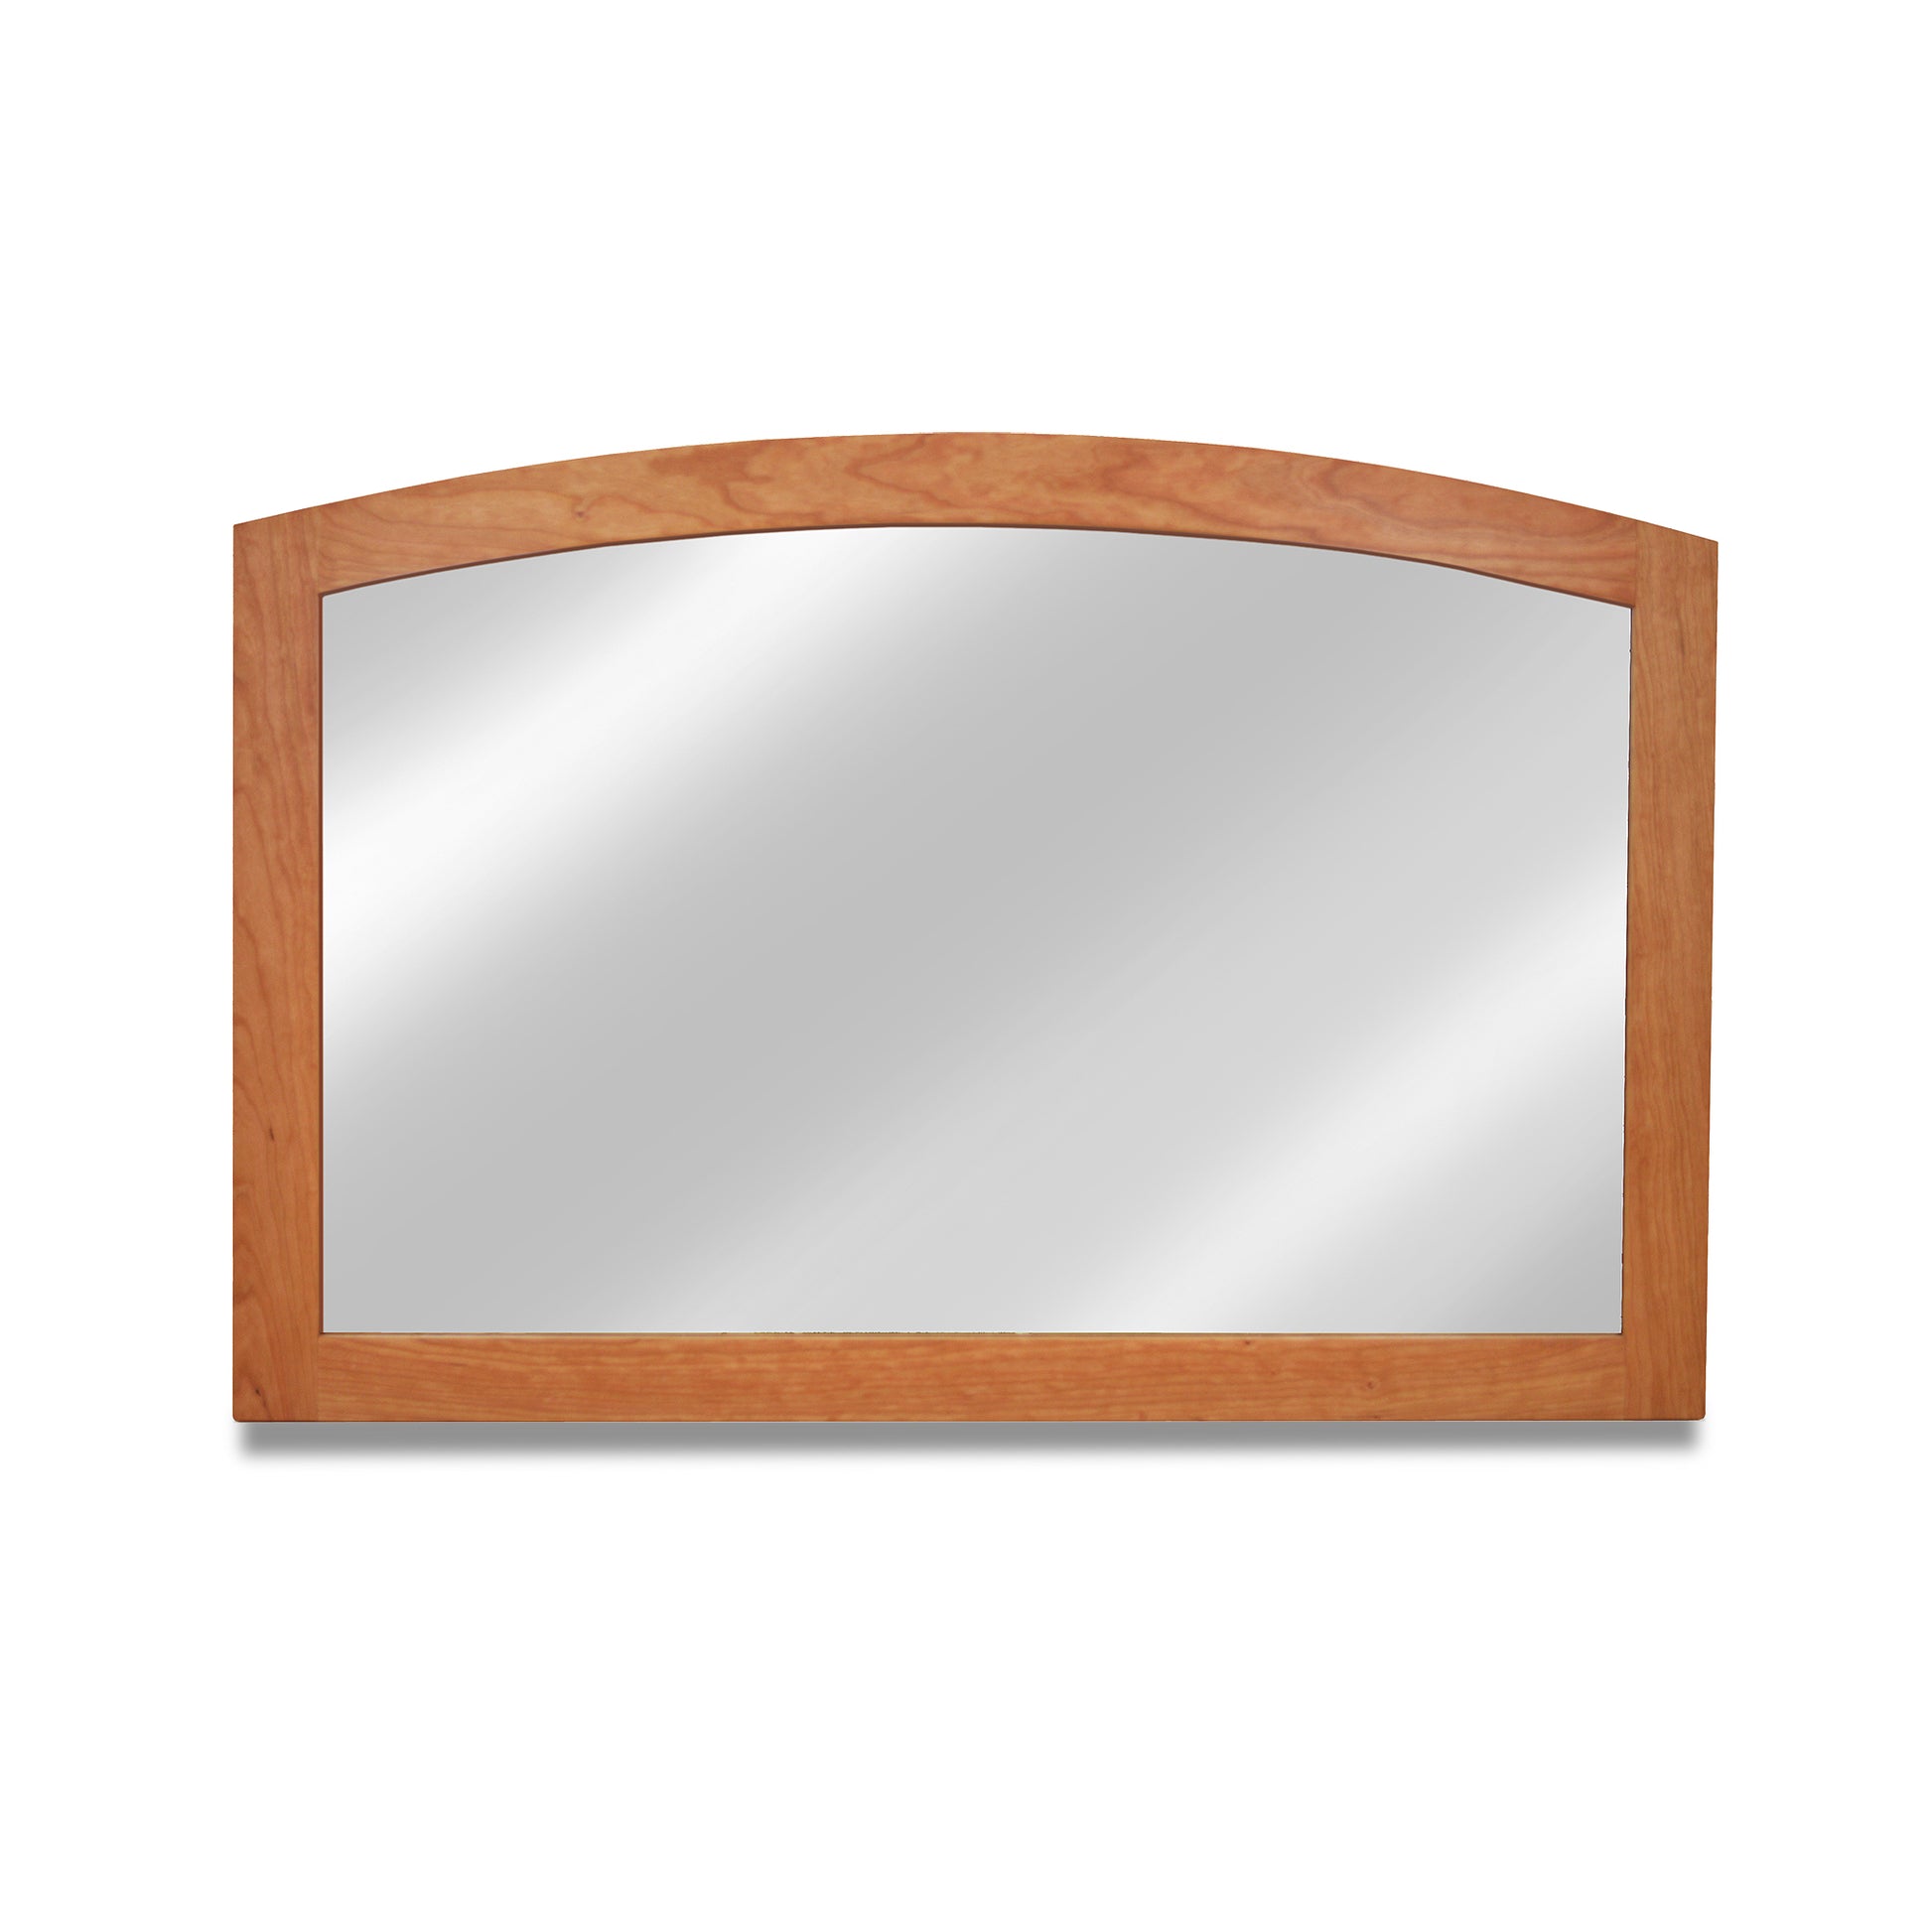 A Maple Corner Woodworks American Shaker Arched Mirror isolated on a white background.